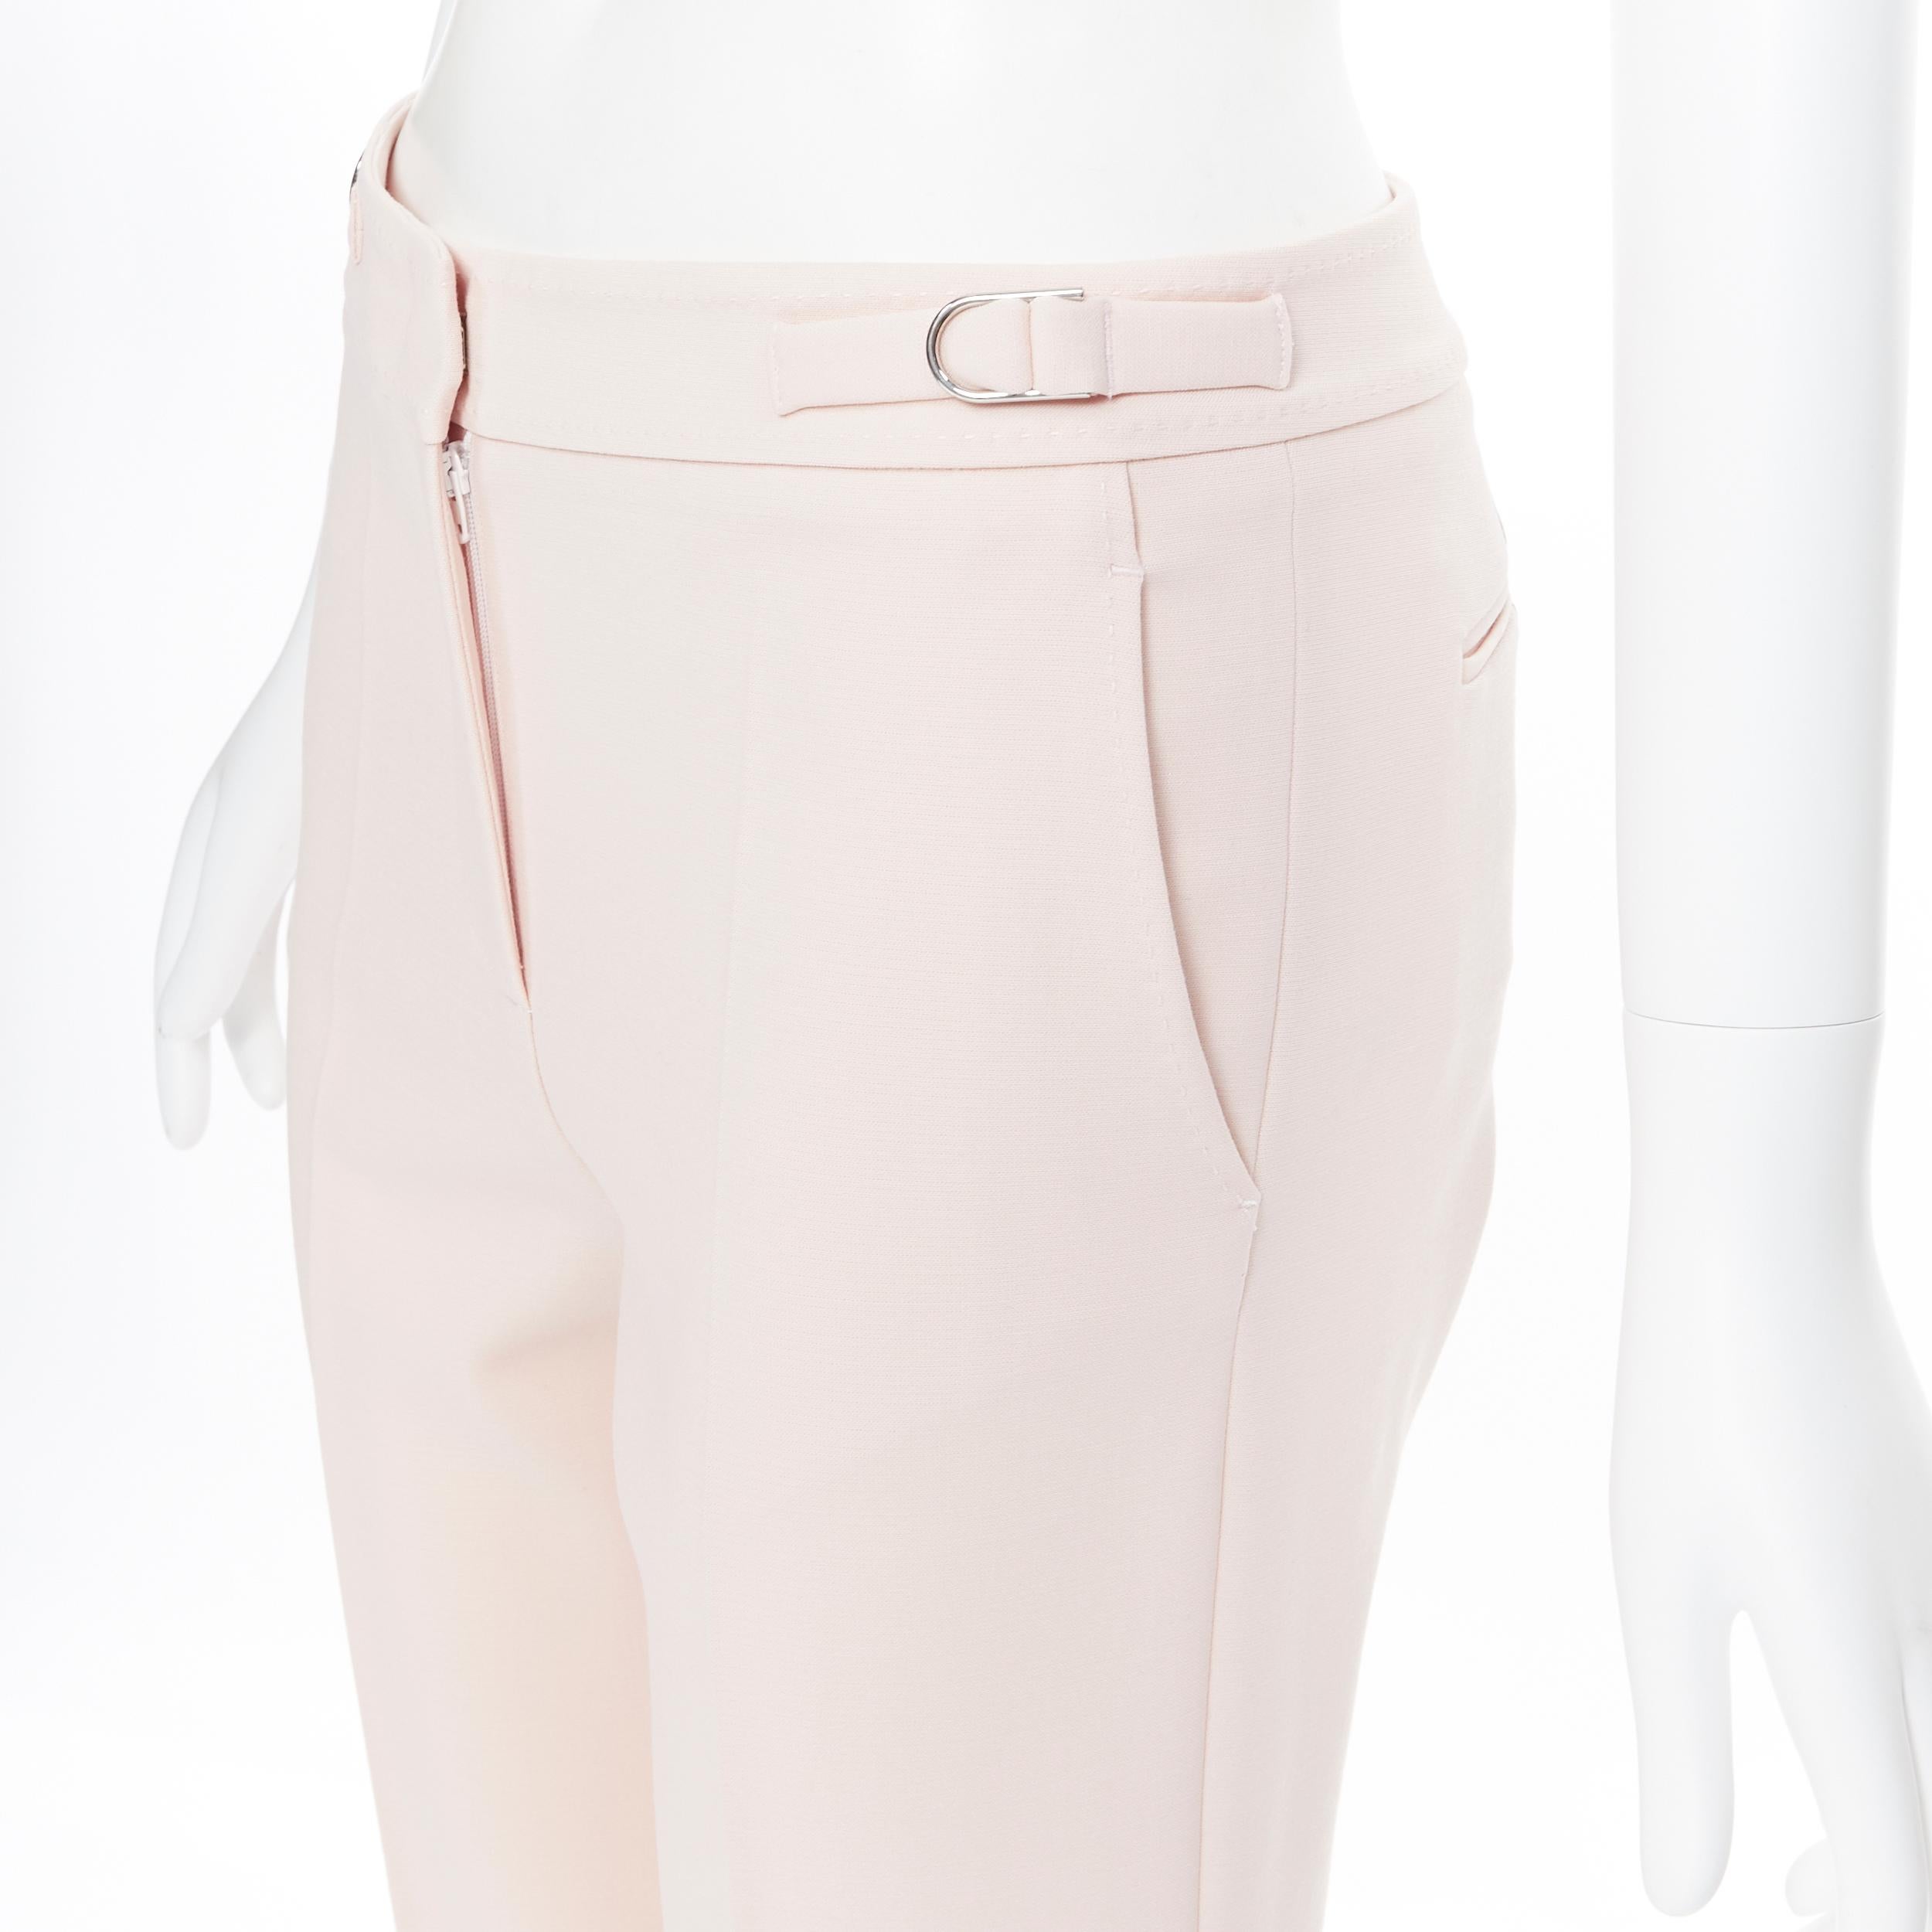 GABRIELA HEARST blush pink virgin wool adjustable buckle trousers pants FR38
Brand: Gabriela Hearst
Designer: Gabriela Hearst
Model Name / Style: Trousers
Material: Wool
Color: Pink
Pattern: Solid
Closure: Zip
Extra Detail: Silver-tone D-ring at